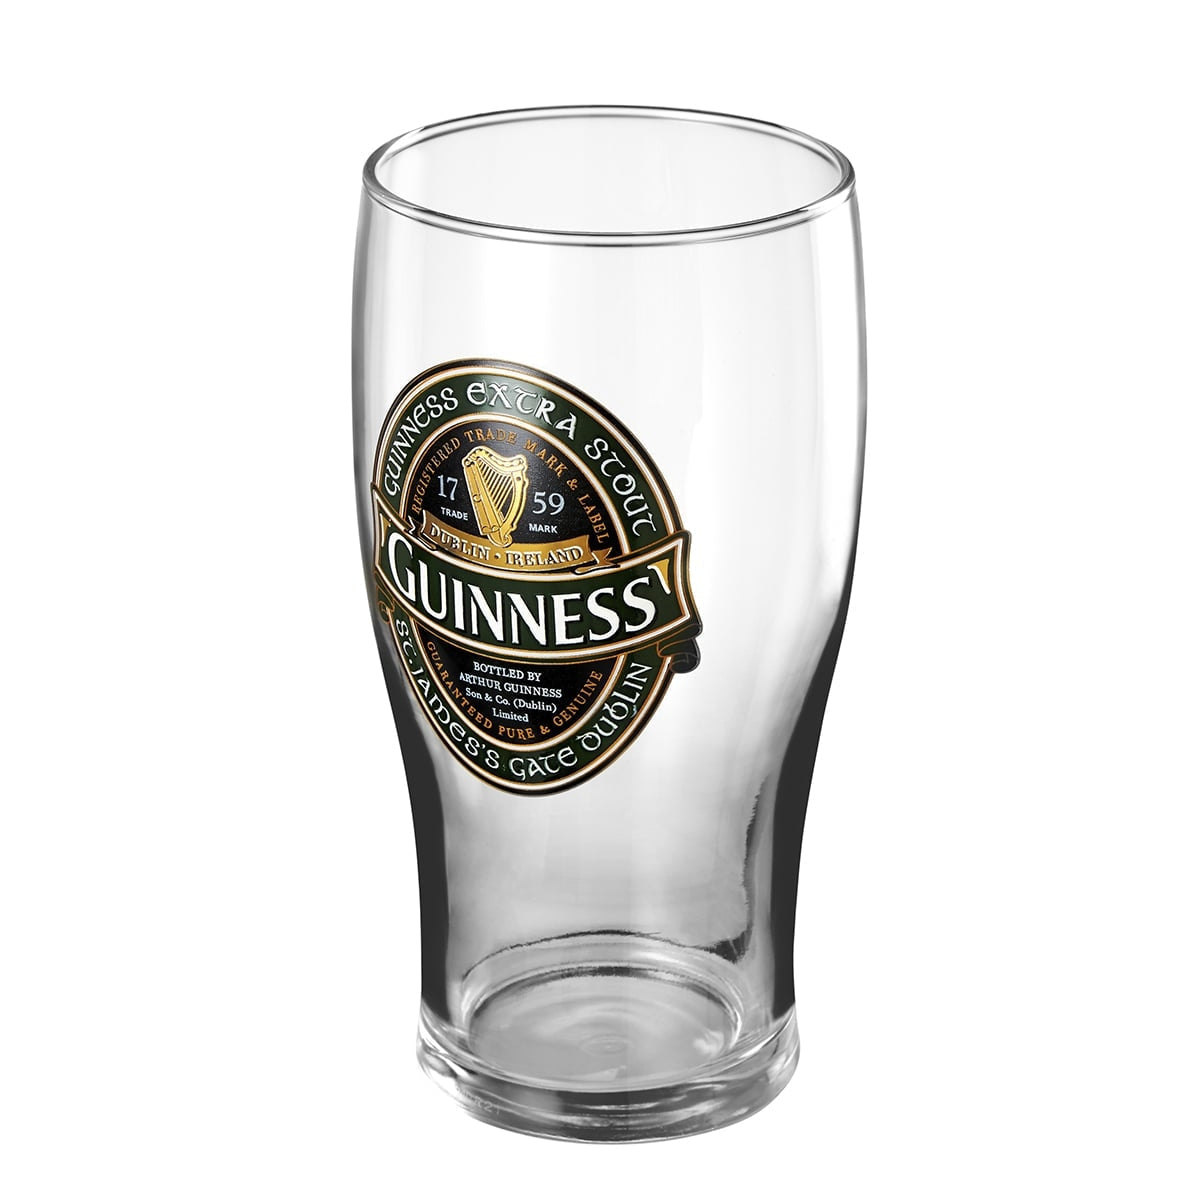 Guinness Ireland Collection Pint Glass - 2 Pack